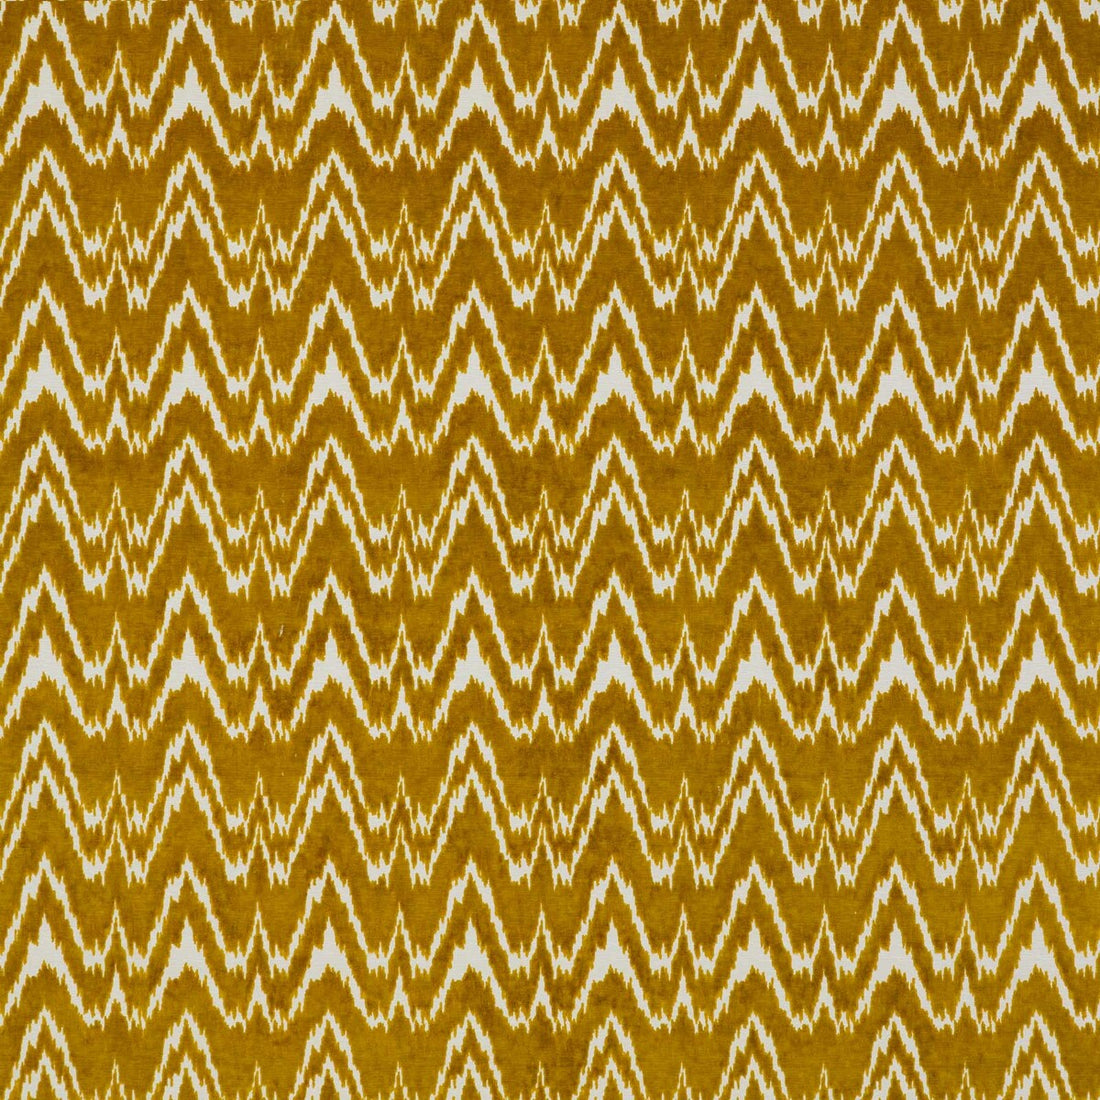 Janano fabric in oro color - pattern LCT5183.004.0 - by Gaston y Daniela in the Lorenzo Castillo VII The Rectory collection